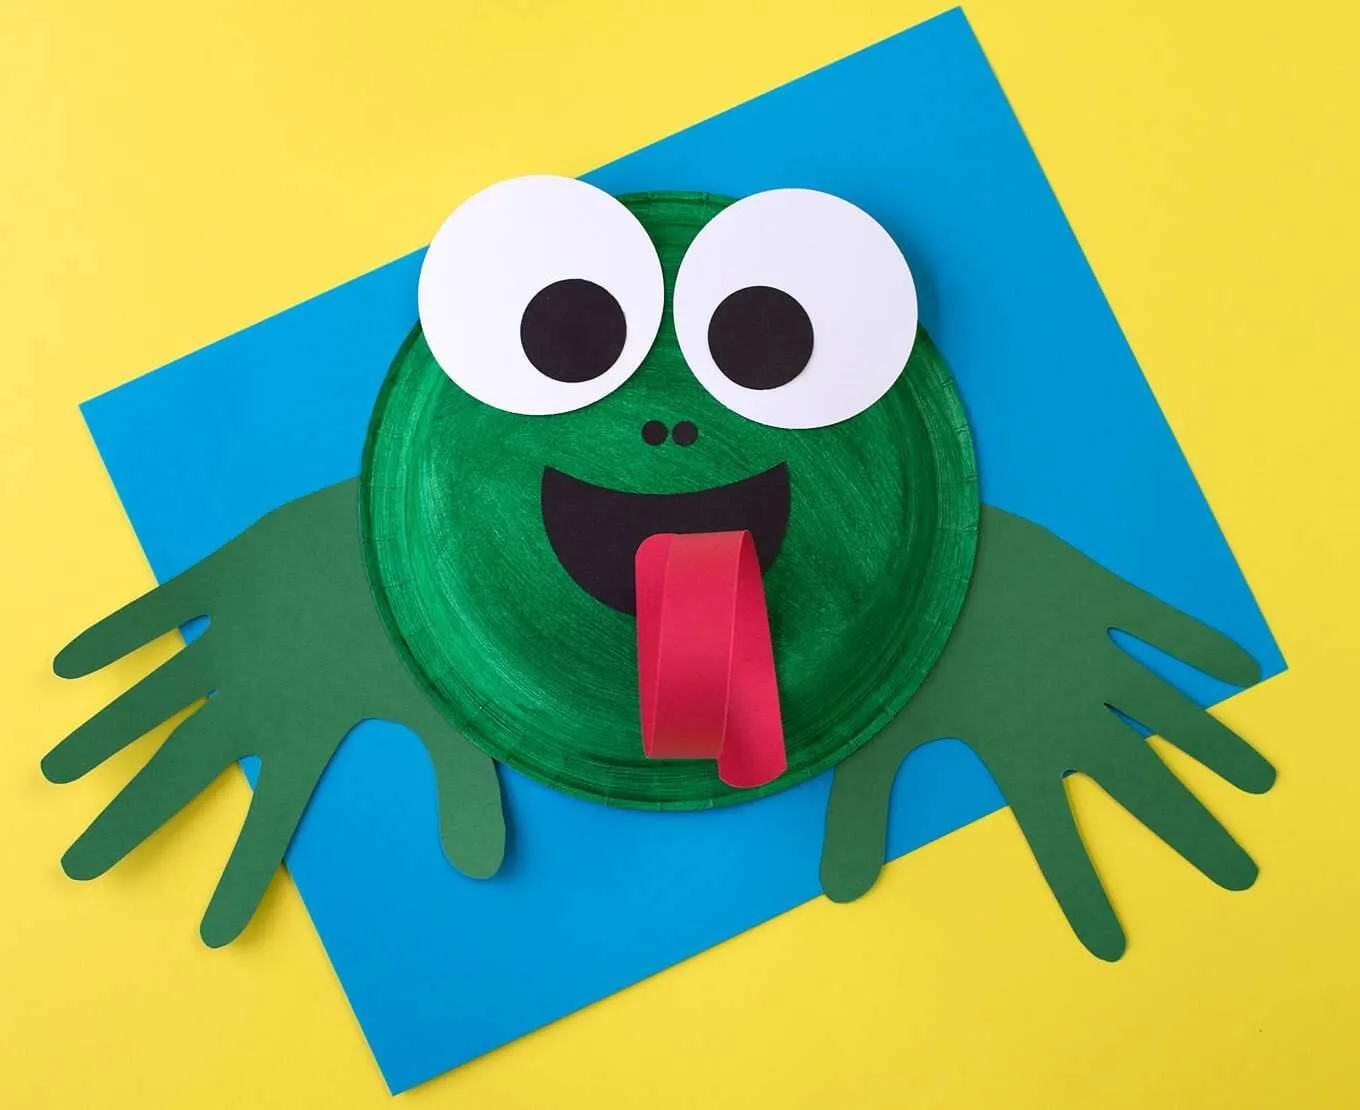 Paper plate frog face with big googly eyes and its tongue sticking out.